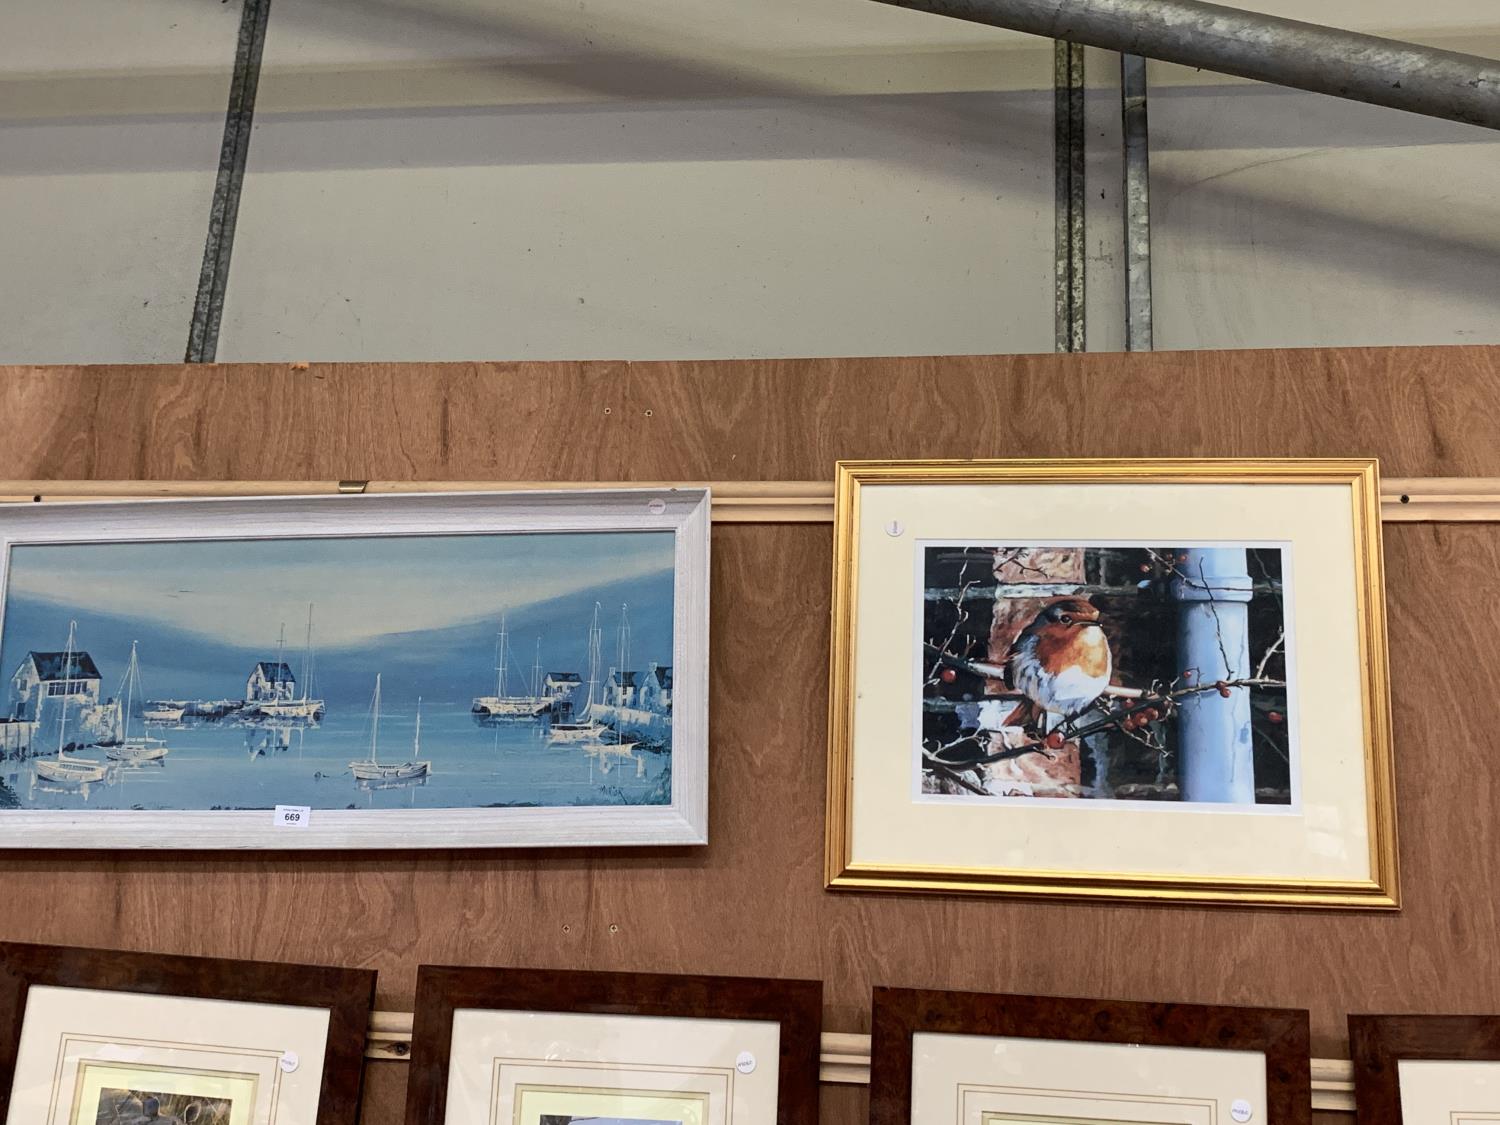 A FRAMED PICTURE OF A HARBOUR AND FURTHER BIRD PRINT